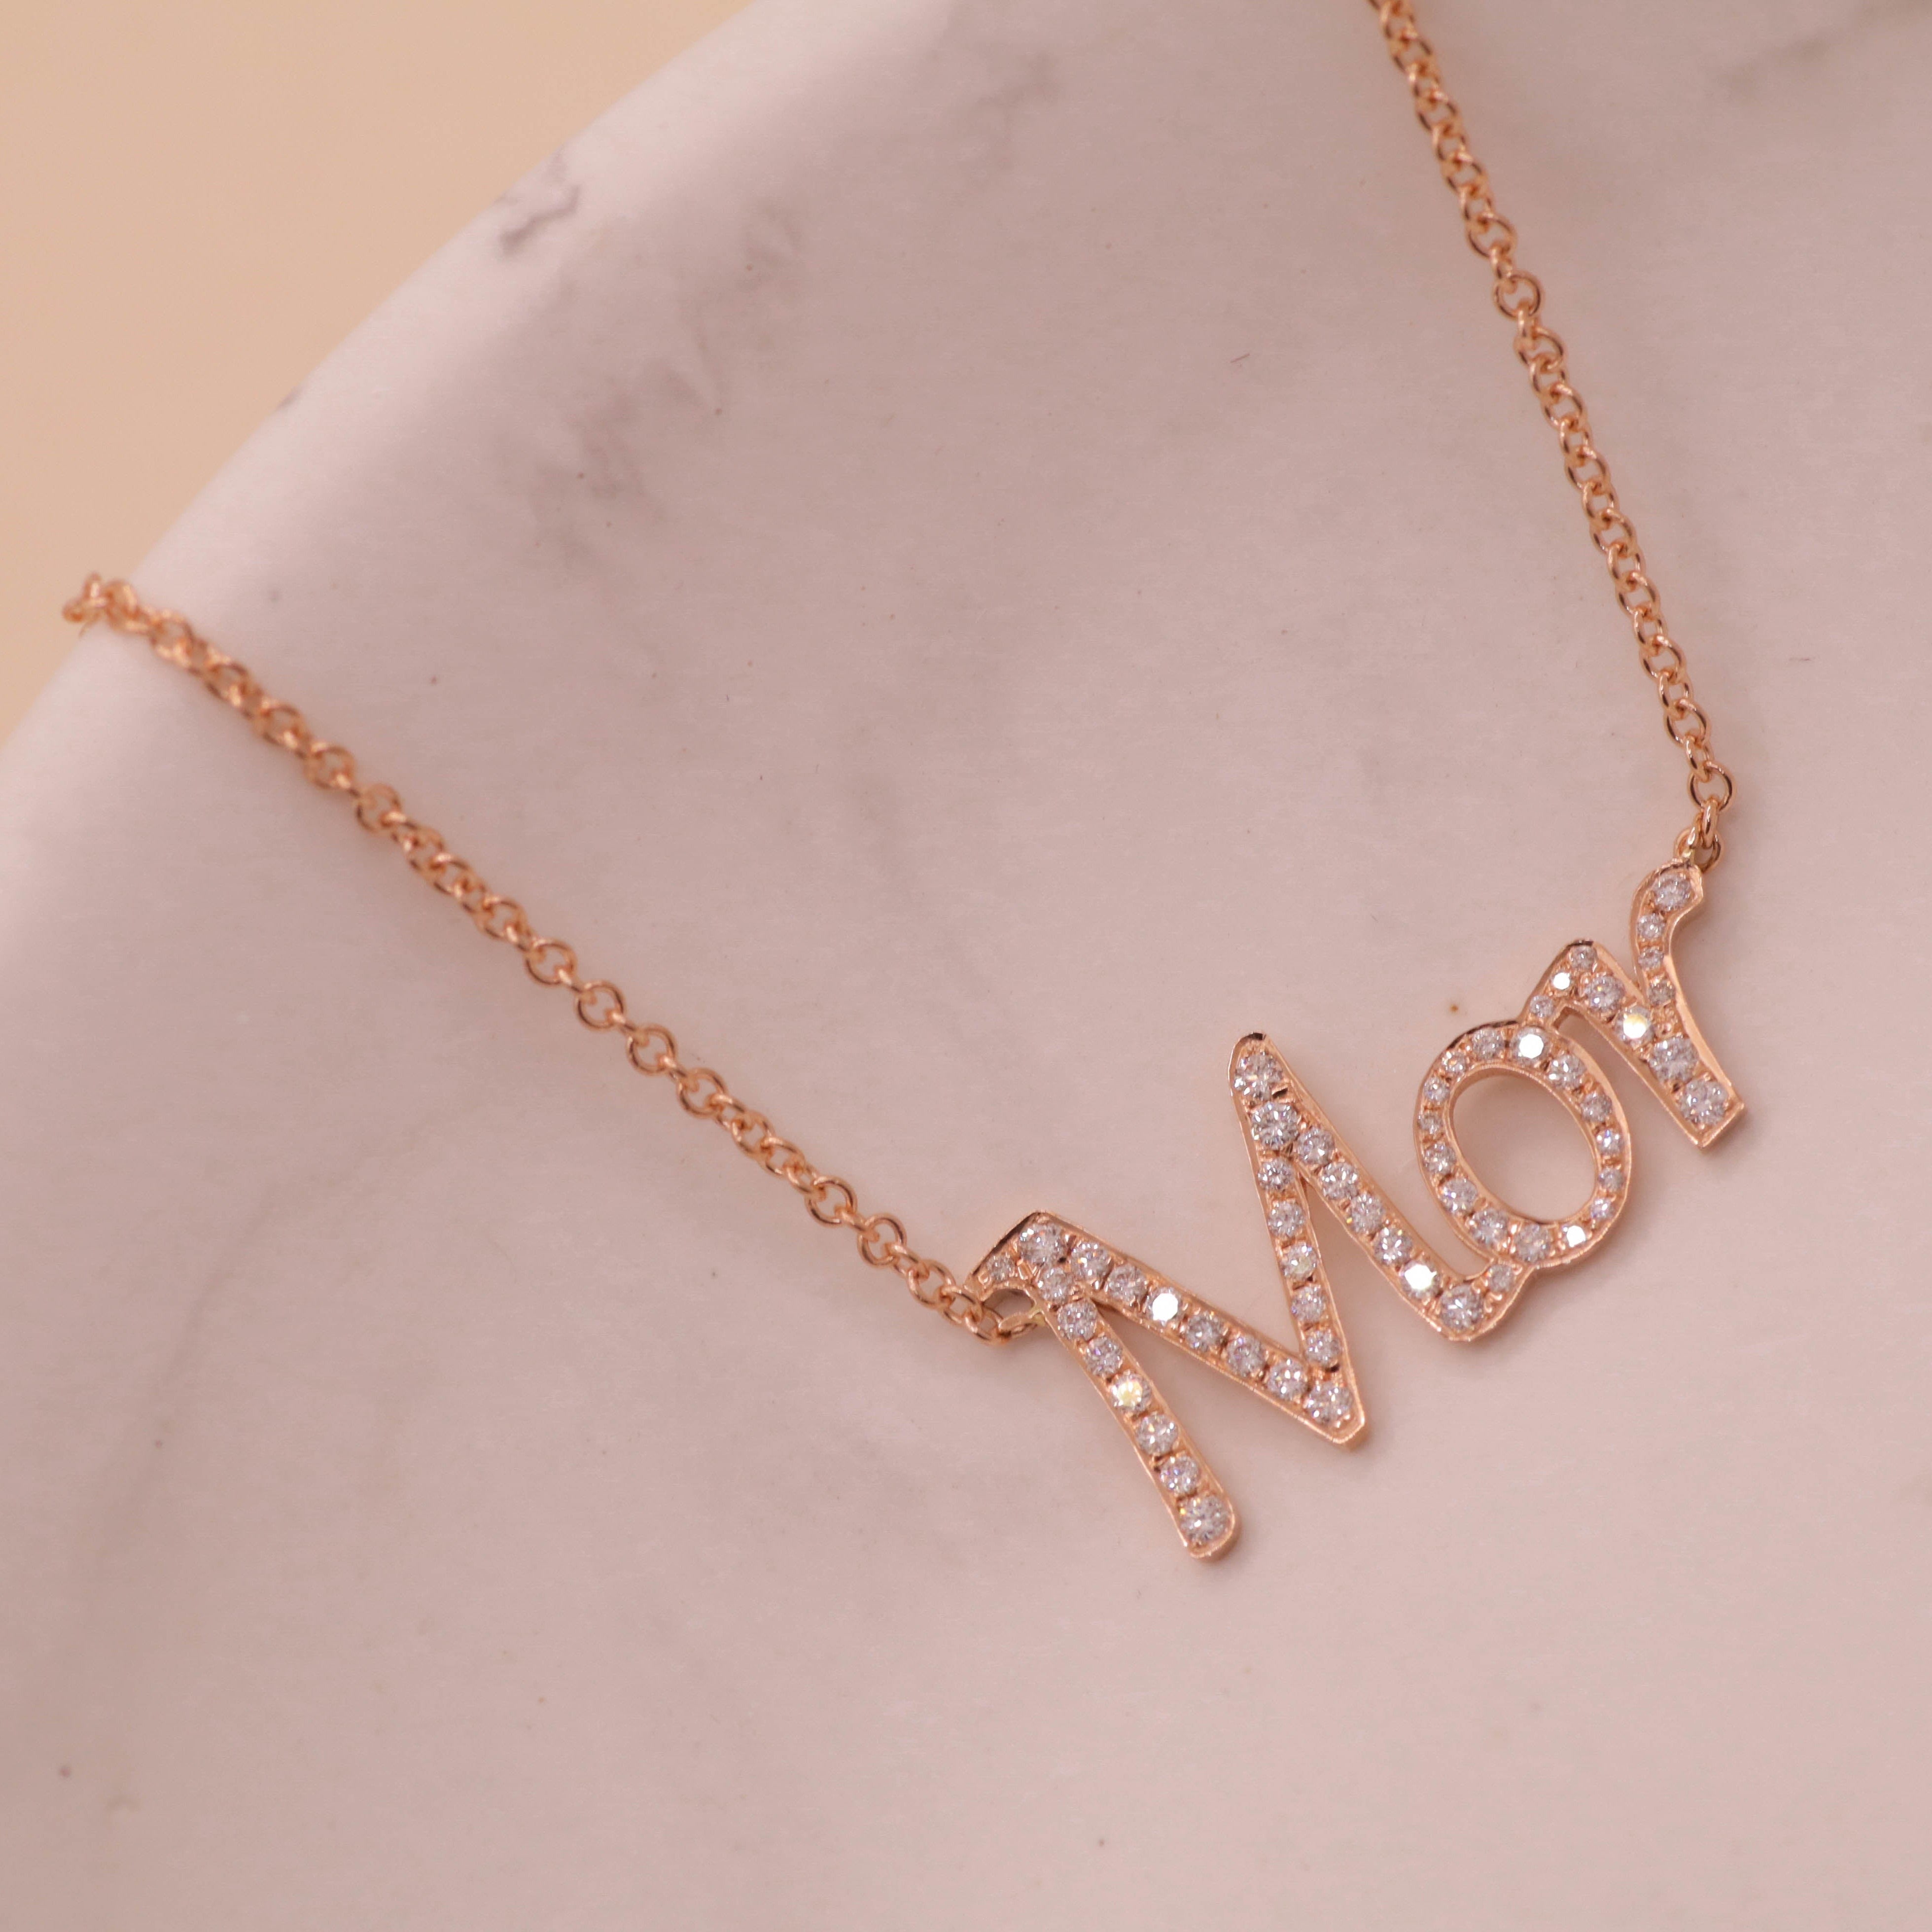 Name necklace set with diamonds